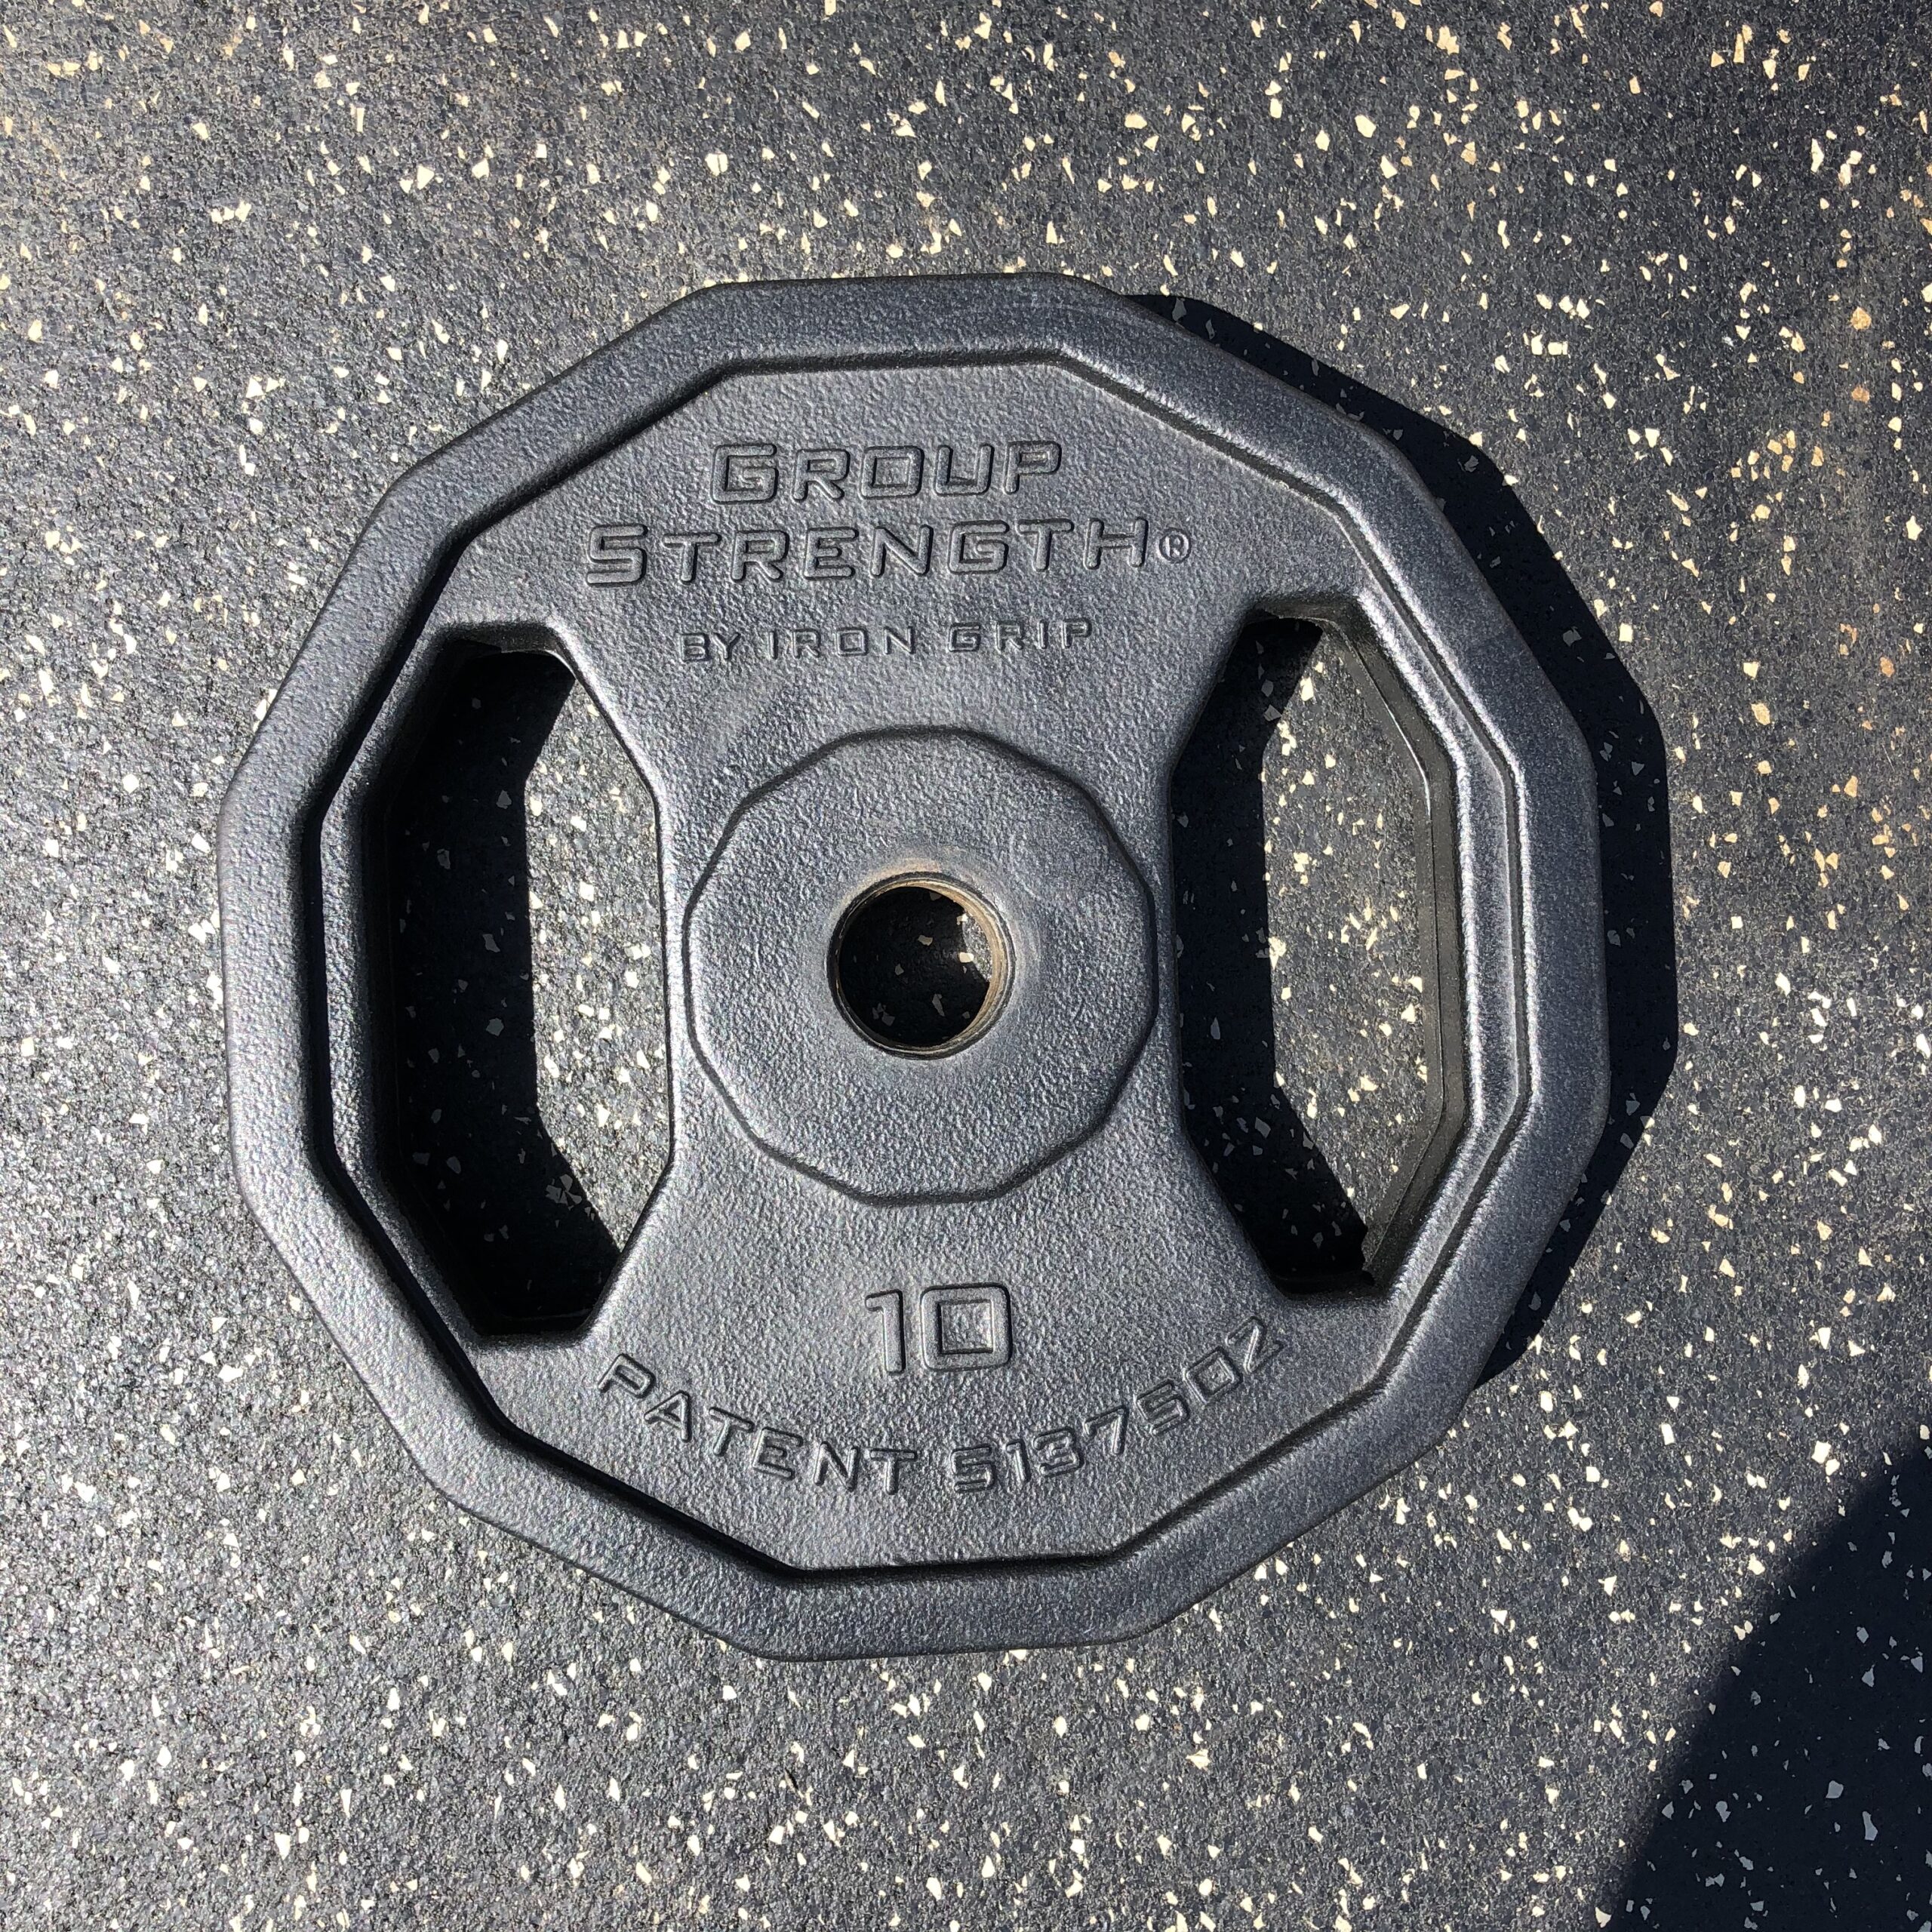 Iron Grip Rubber Plates (USED) - Primo Fitness